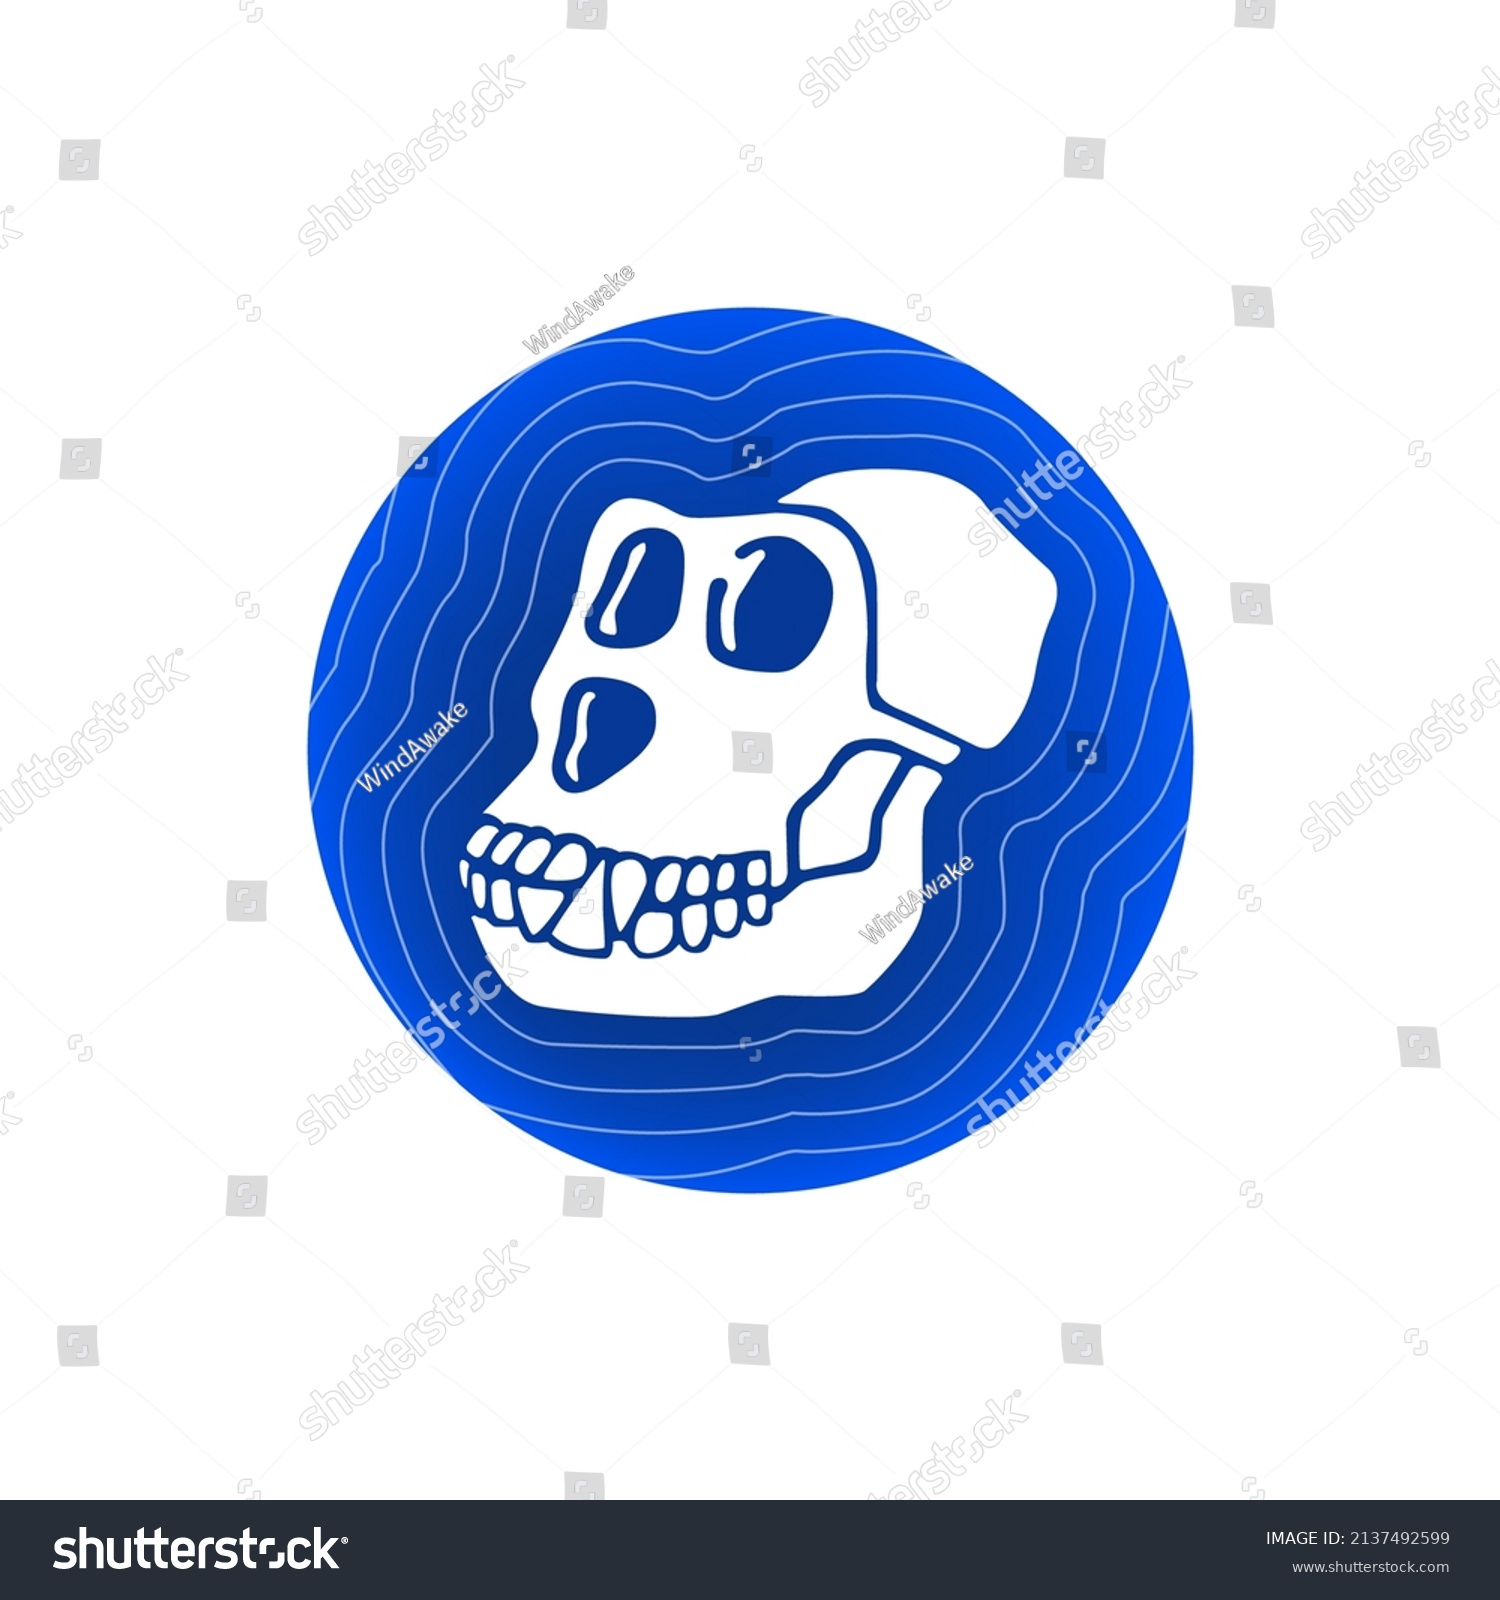 SVG of Apecoin (APE) icon isolated on white background. svg